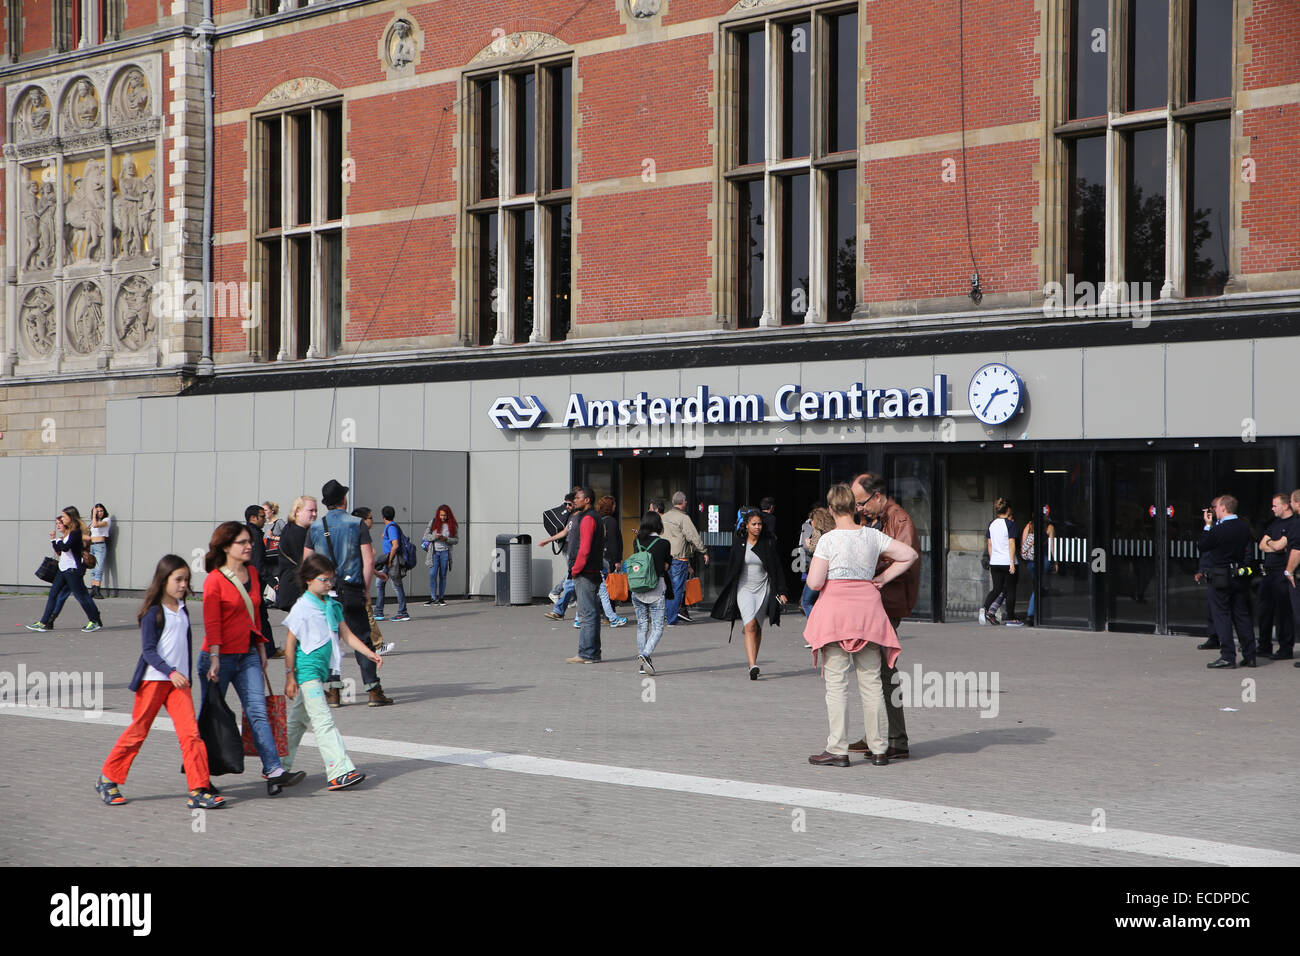 amsterdam centraal station entrance people outdoor exterior Stock Photo